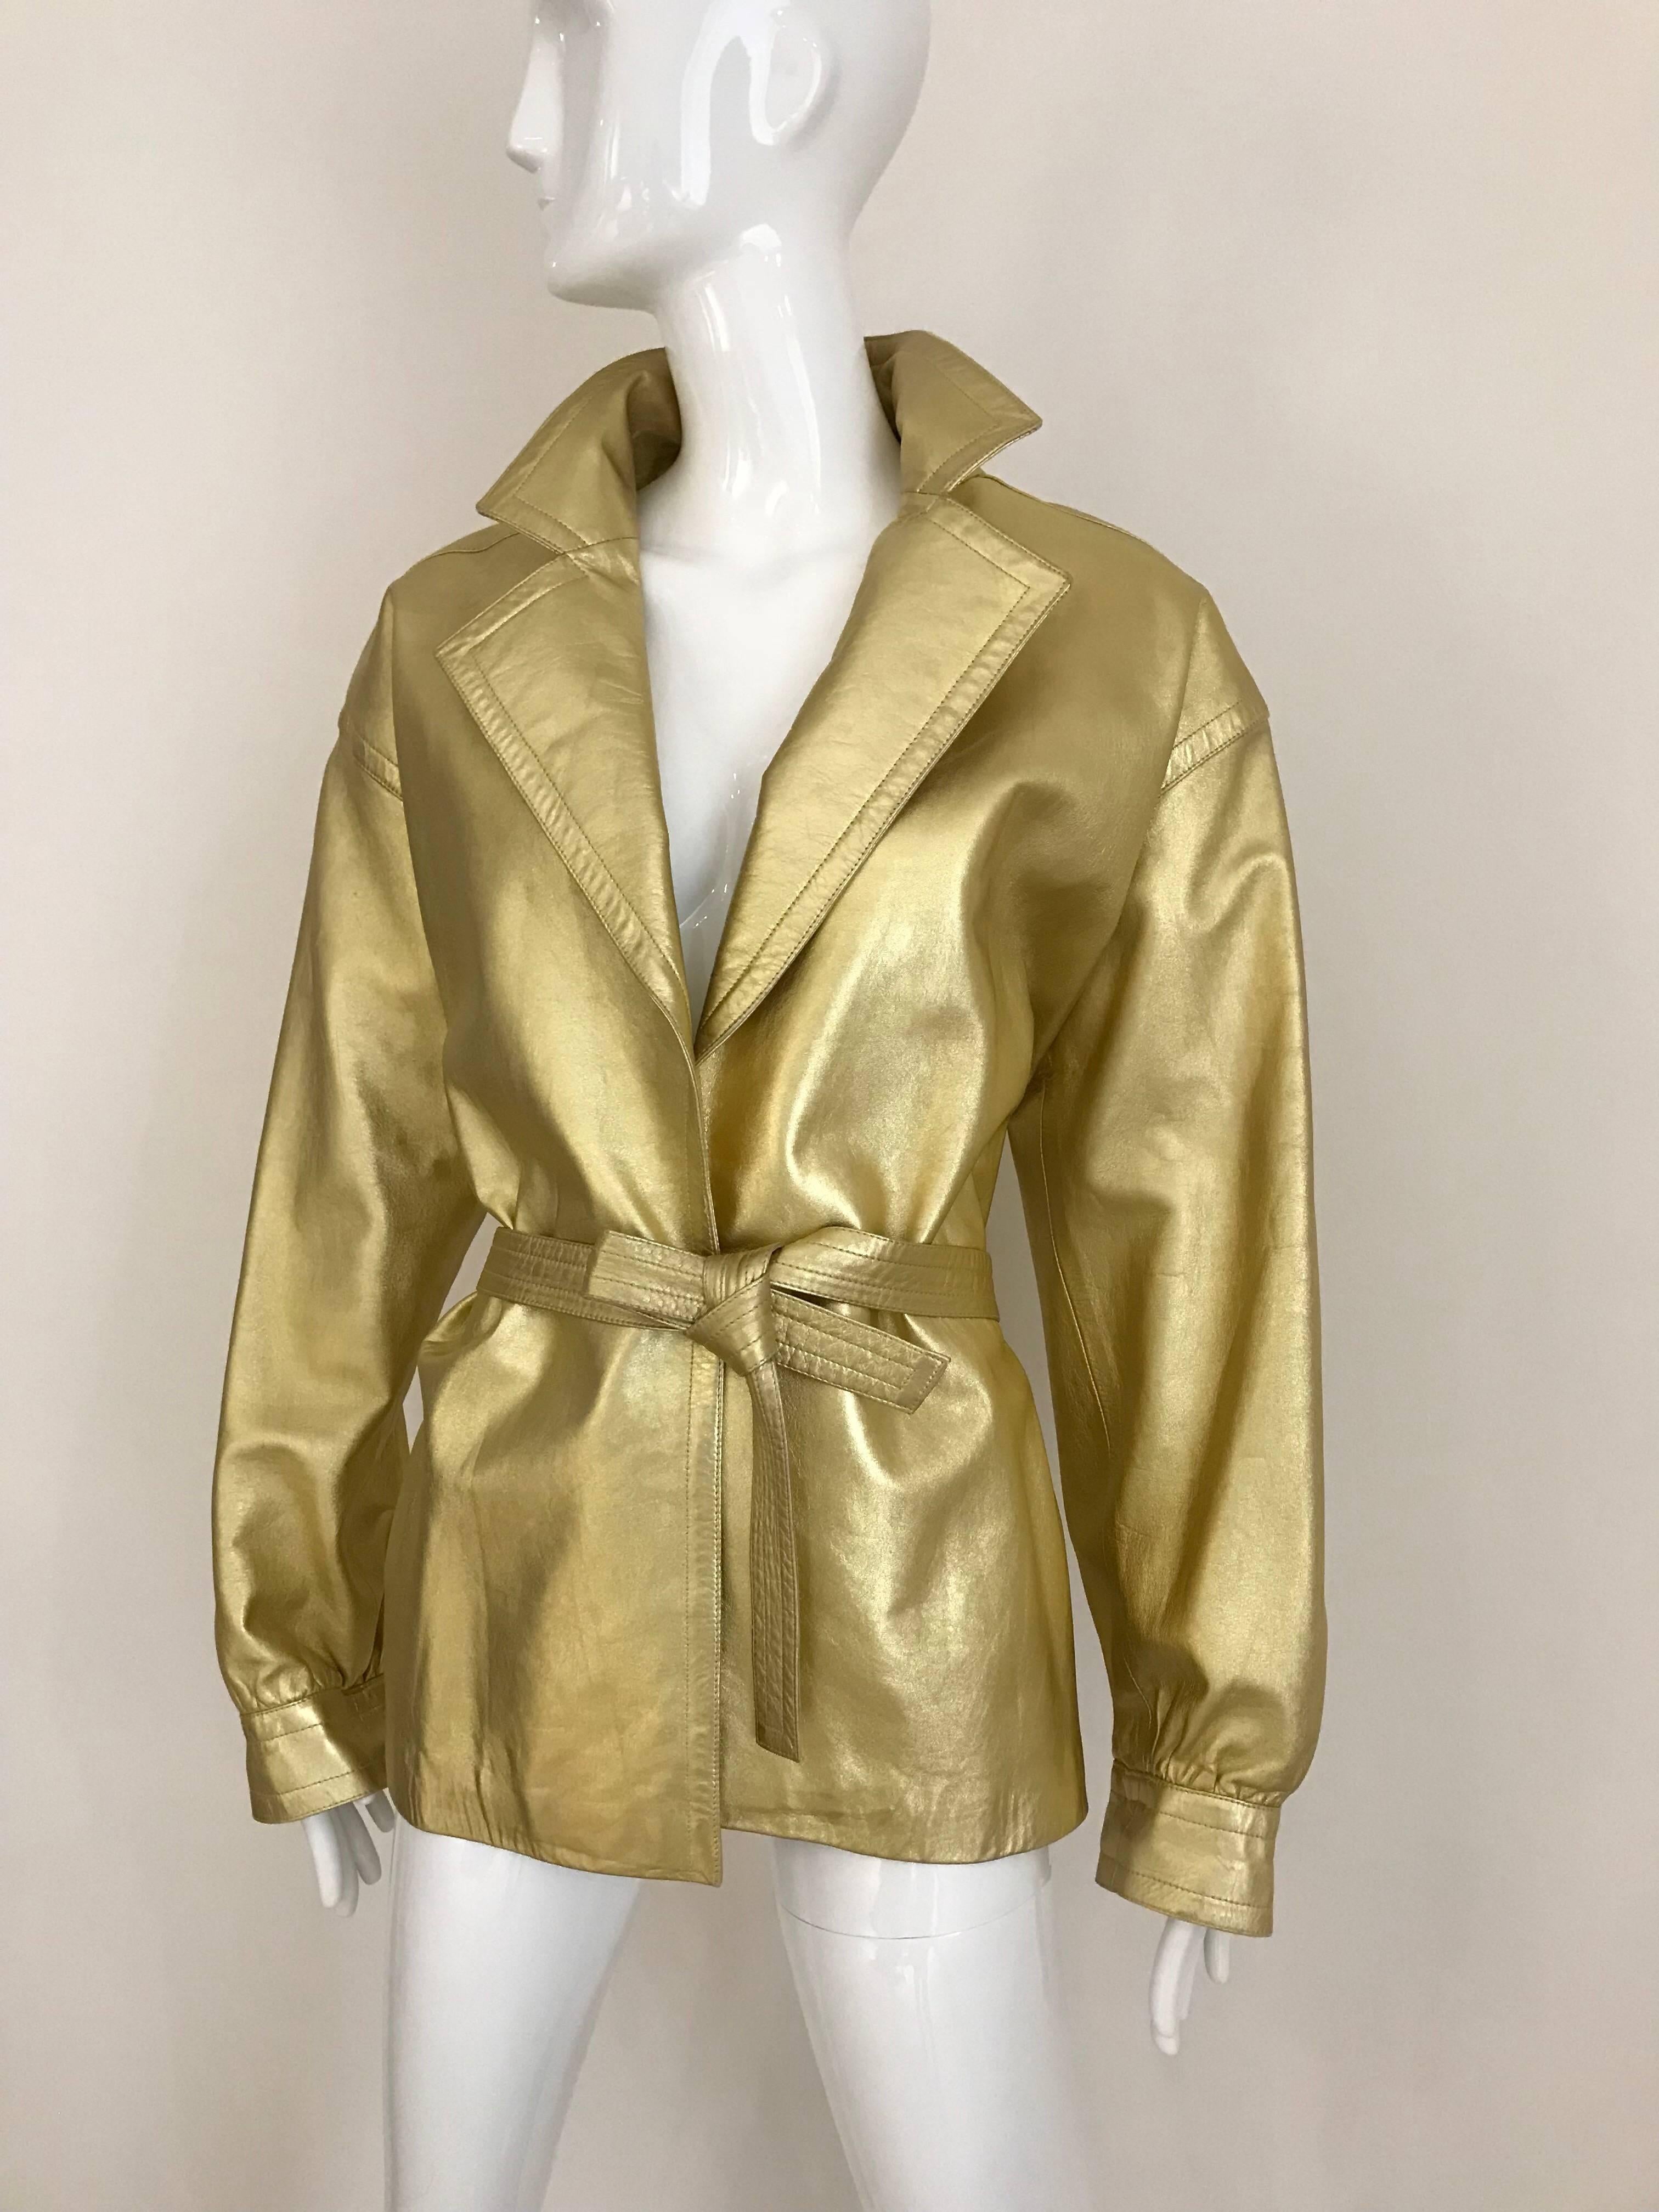 This Saint Laurent rive gauche gold leather jacket embodies classic good looks and style.
There are no fasteners but a thin leather gold belt closed the garment.
Jacket if from the 80s and has shoulder pads.

It’s the sort of item that could be worn